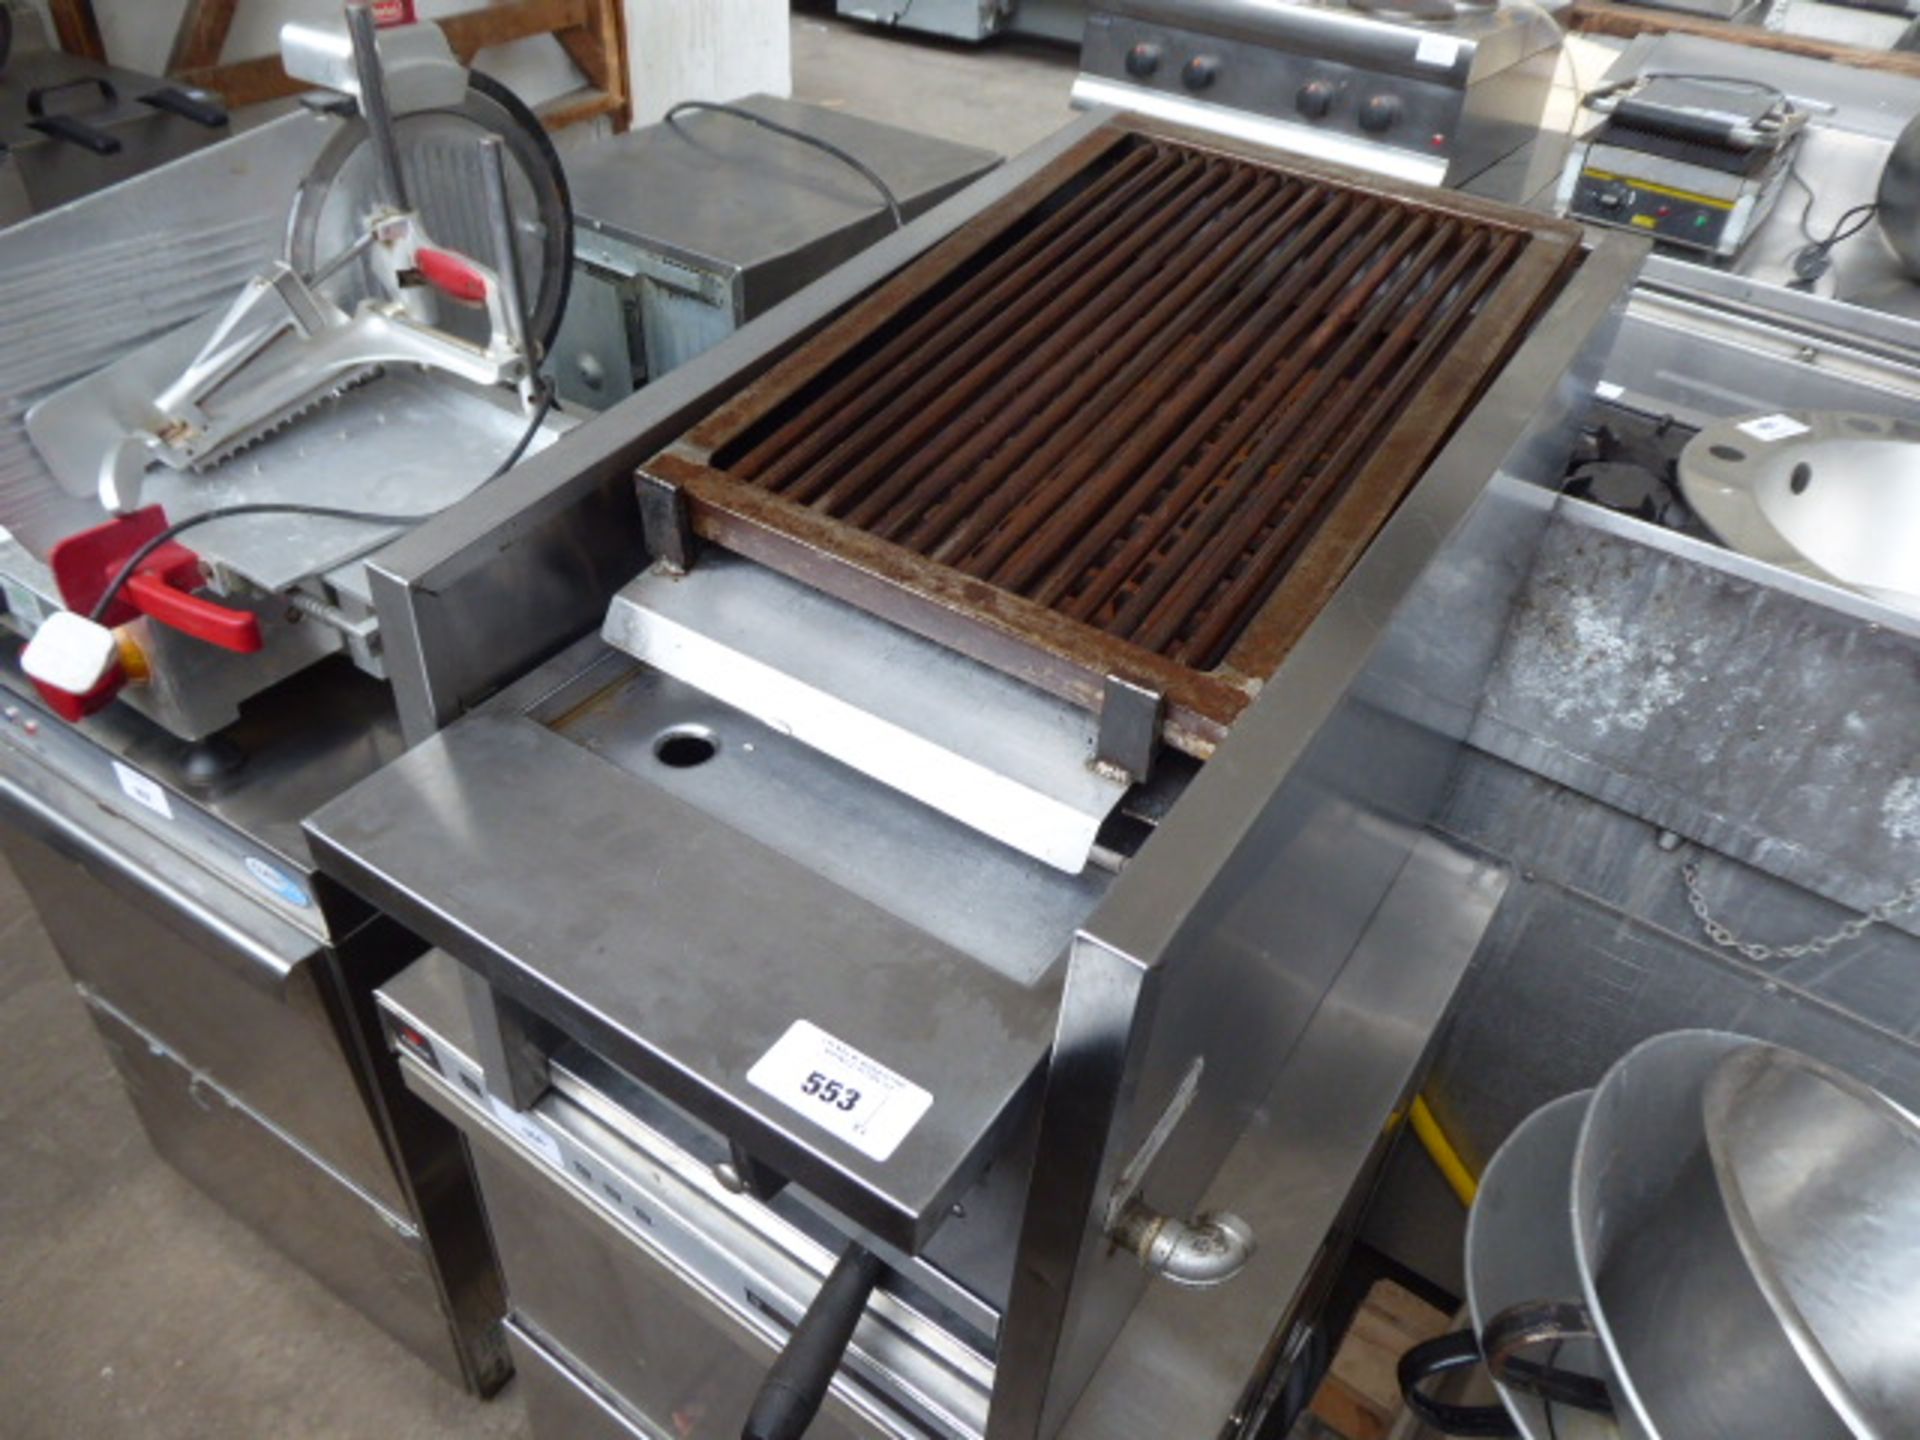 40cm gas chargrill - Image 2 of 2